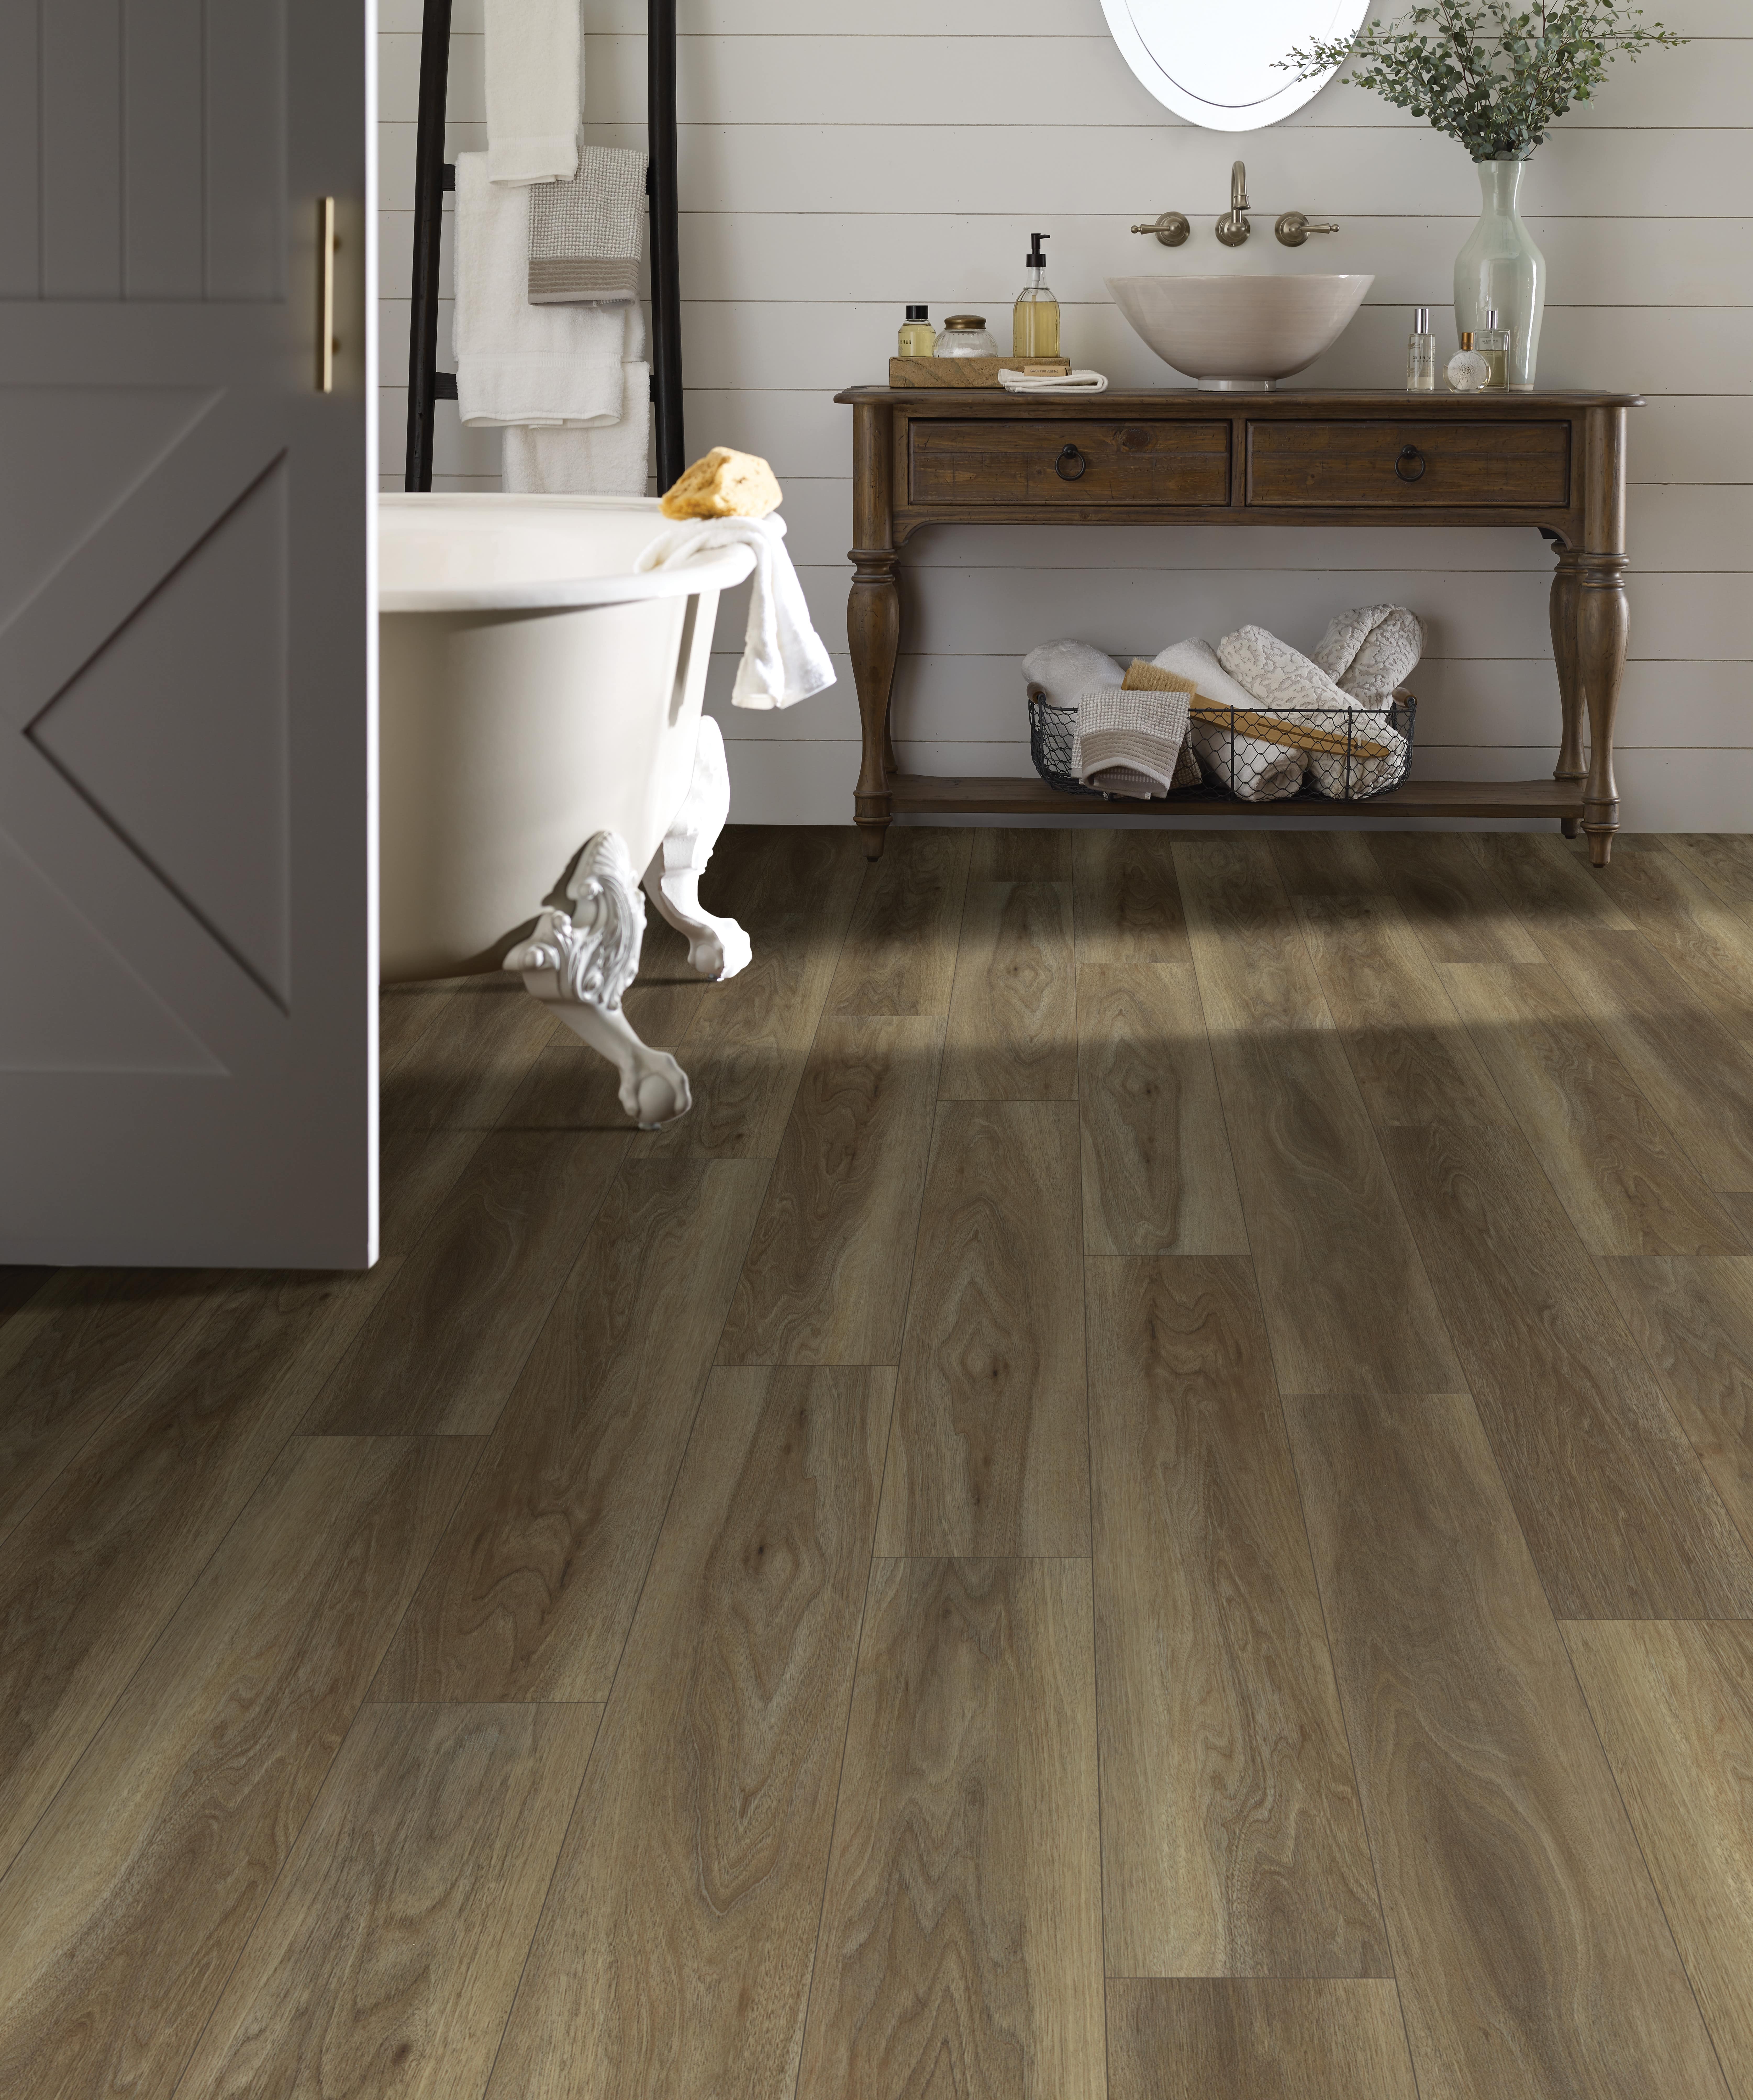 Wood Floor Bathrooms How To Do Them Right Floorings - Is It Ok To Put Laminate Wood Flooring In A Bathroom